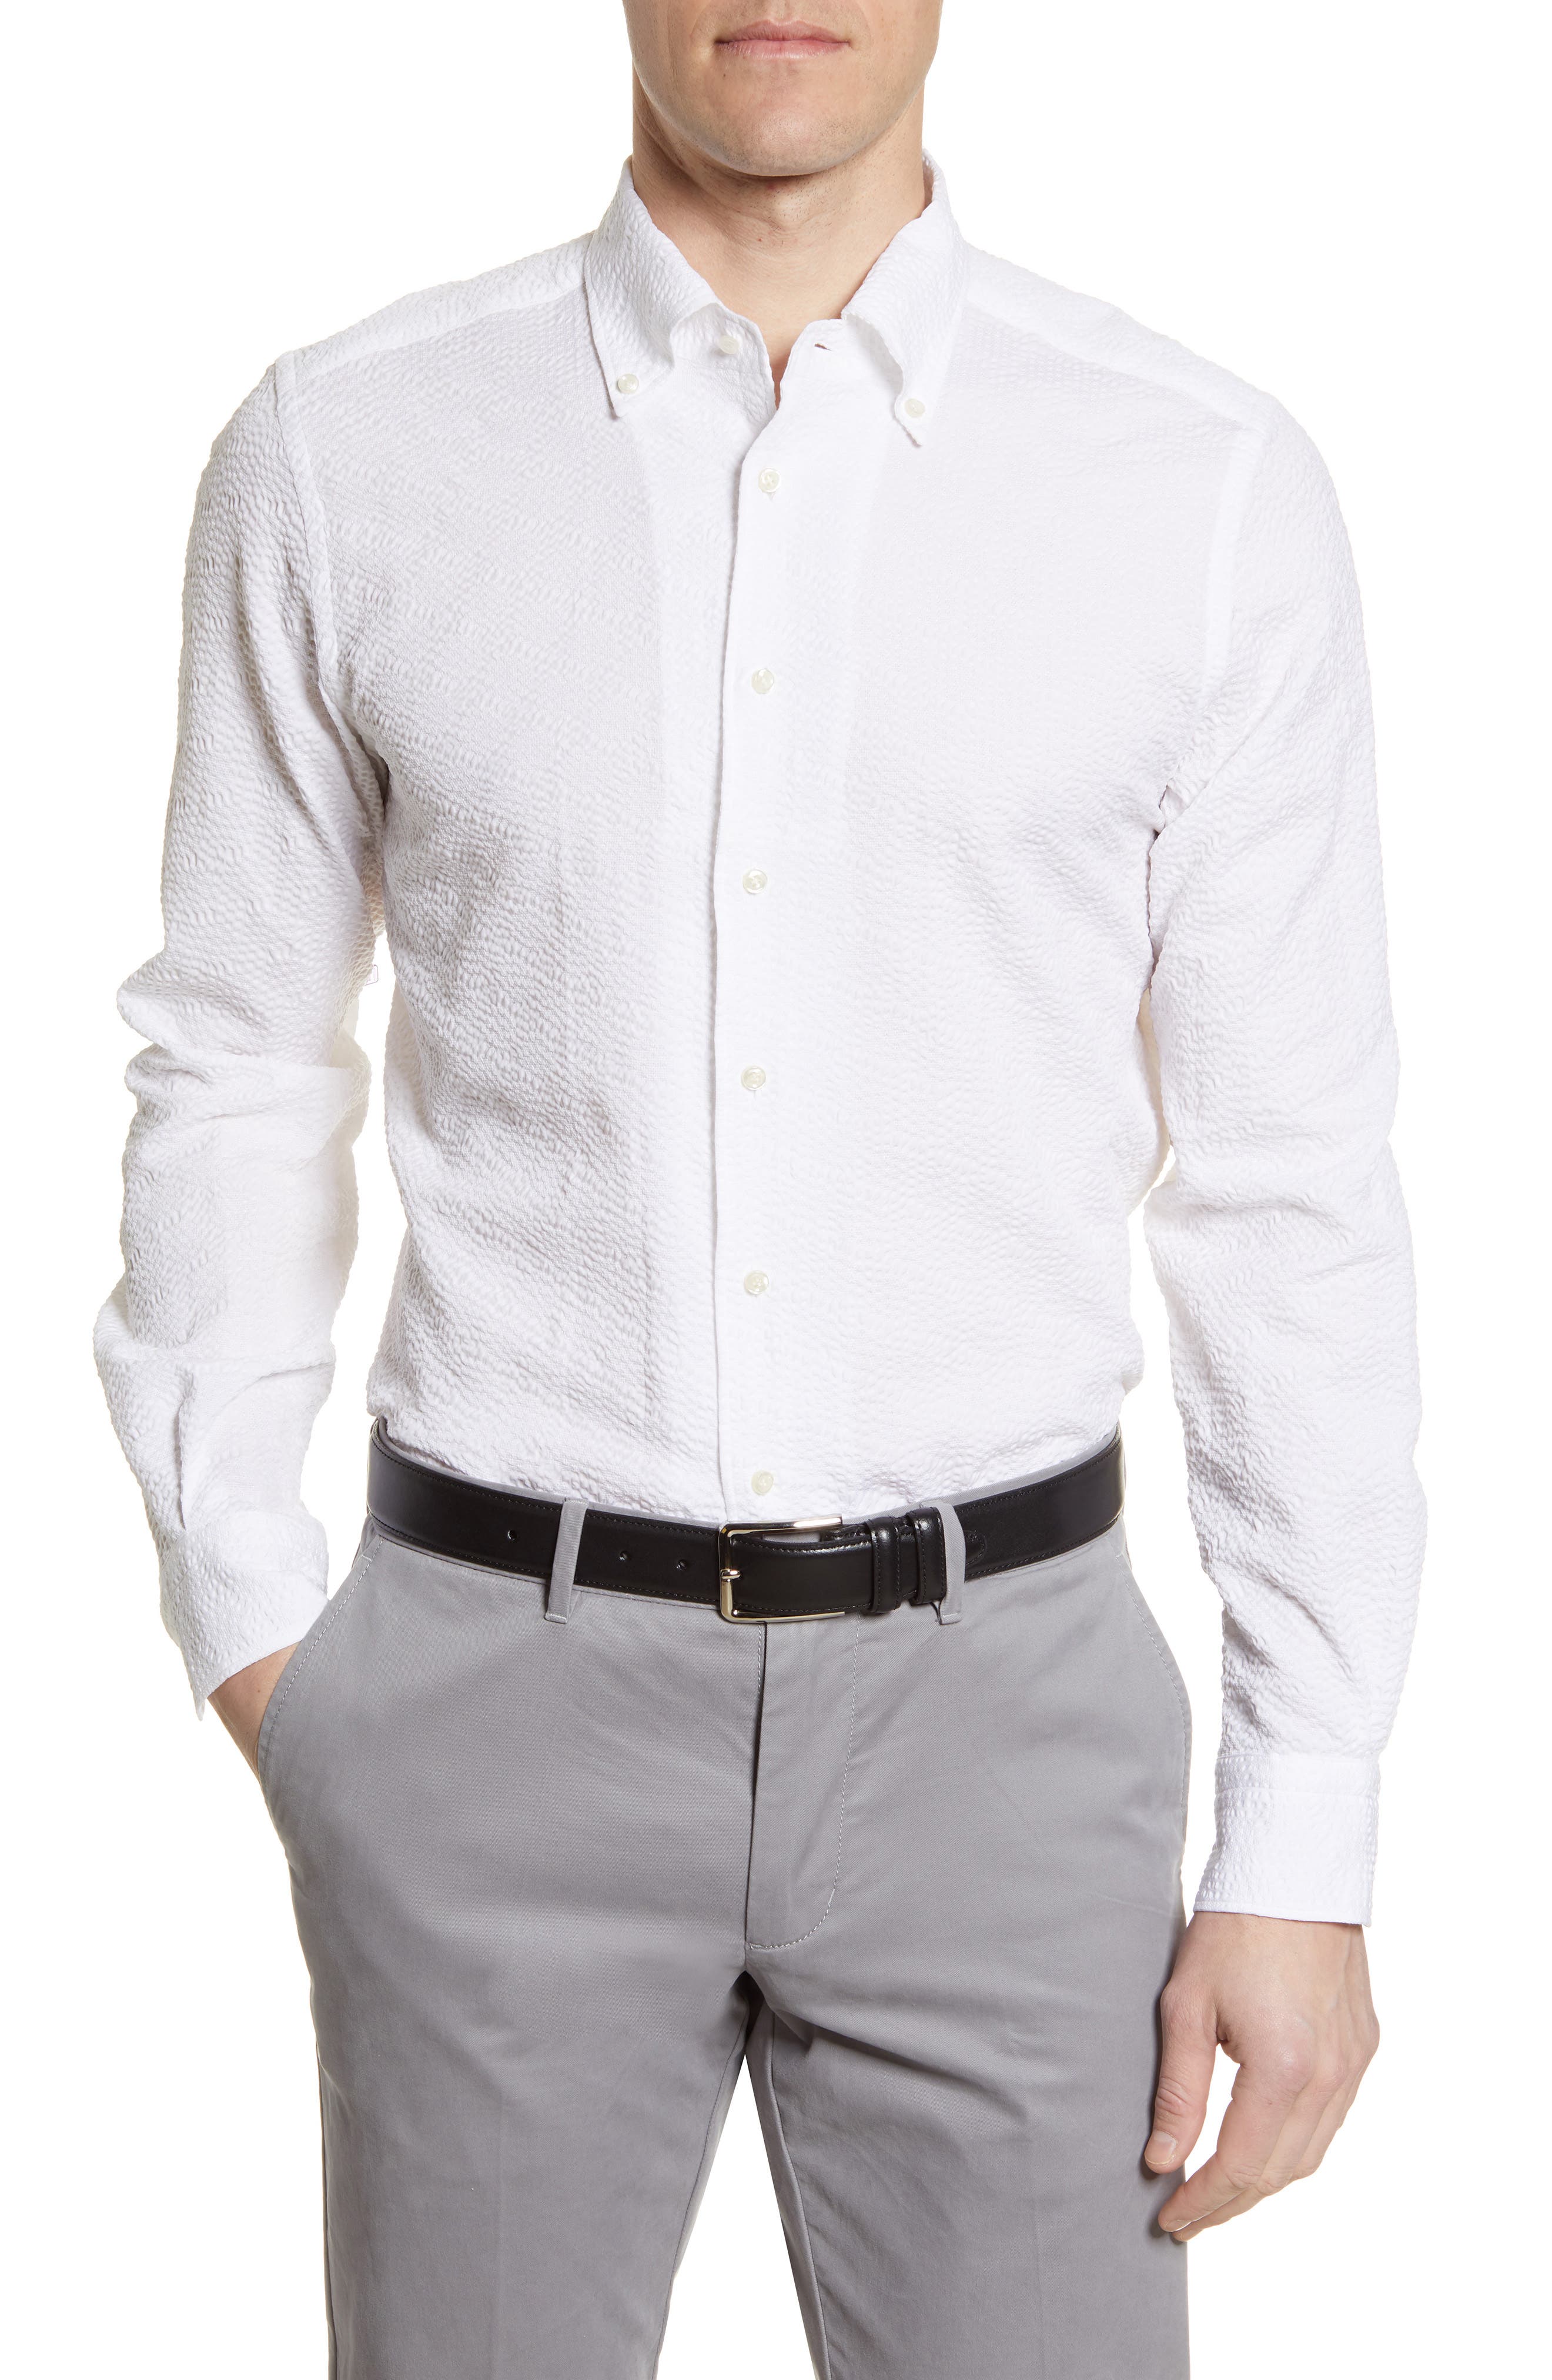 Emanuel Berg Emanual Berg Crinkle Cotton Button-Down Shirt in White at Nordstrom